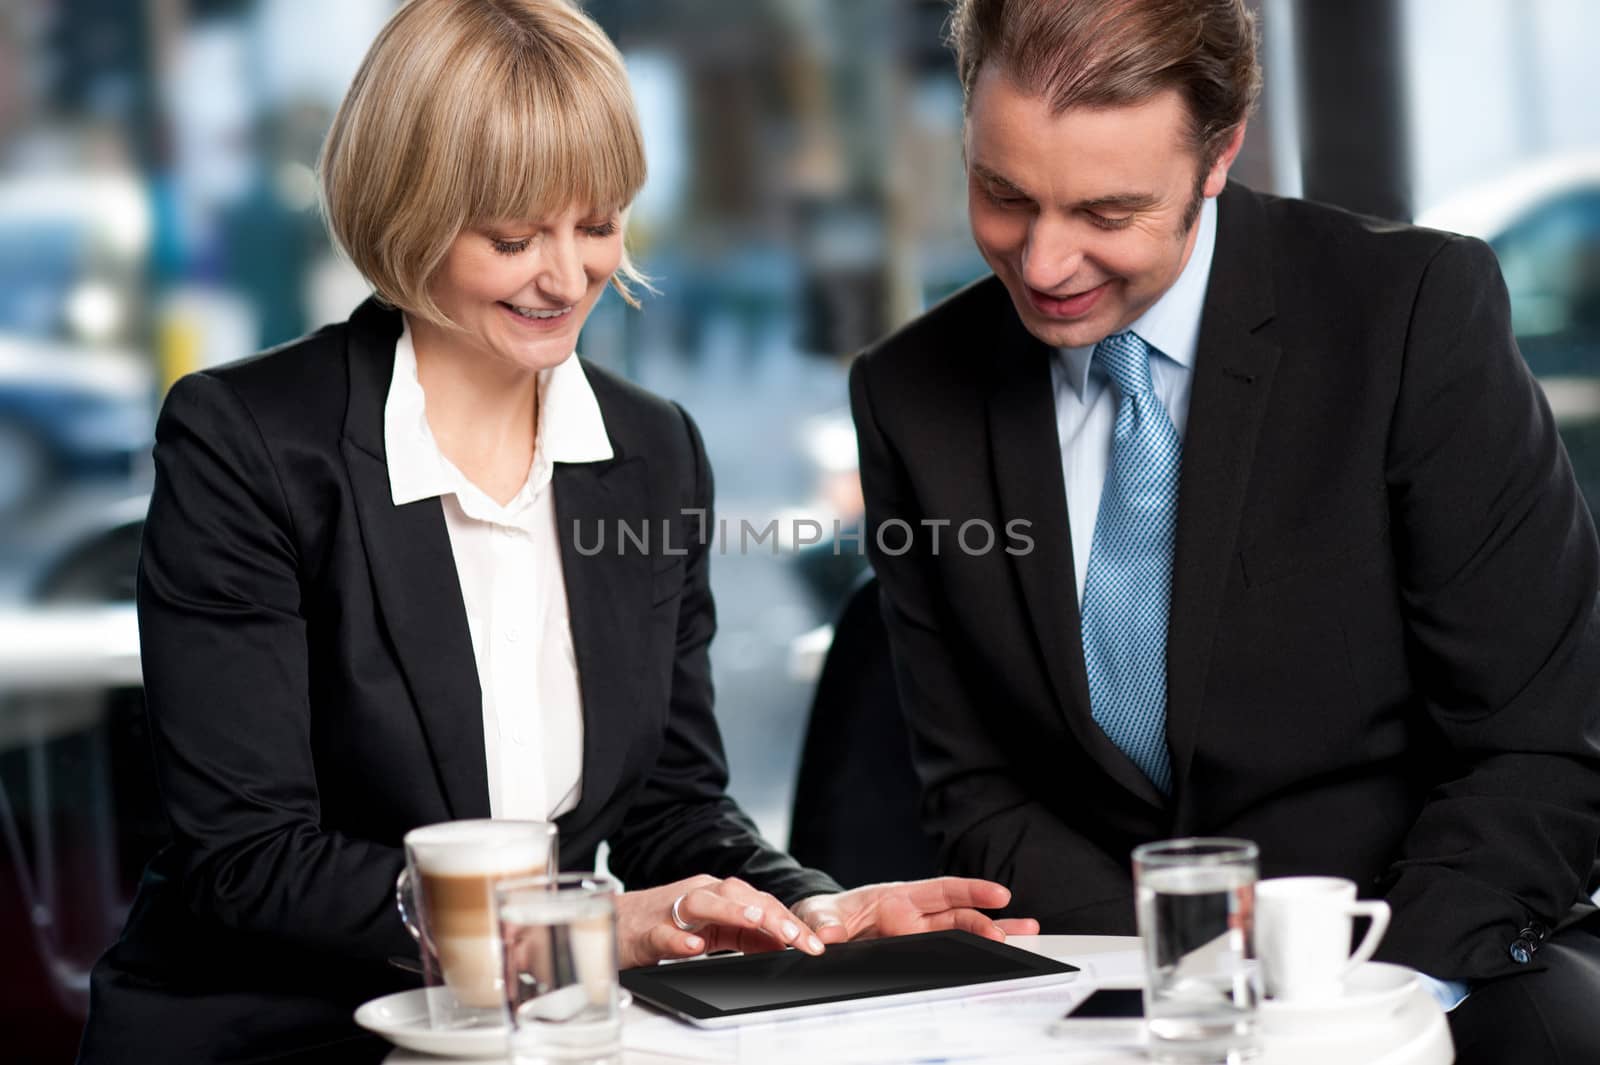 Corporates discussing business over a coffee by stockyimages